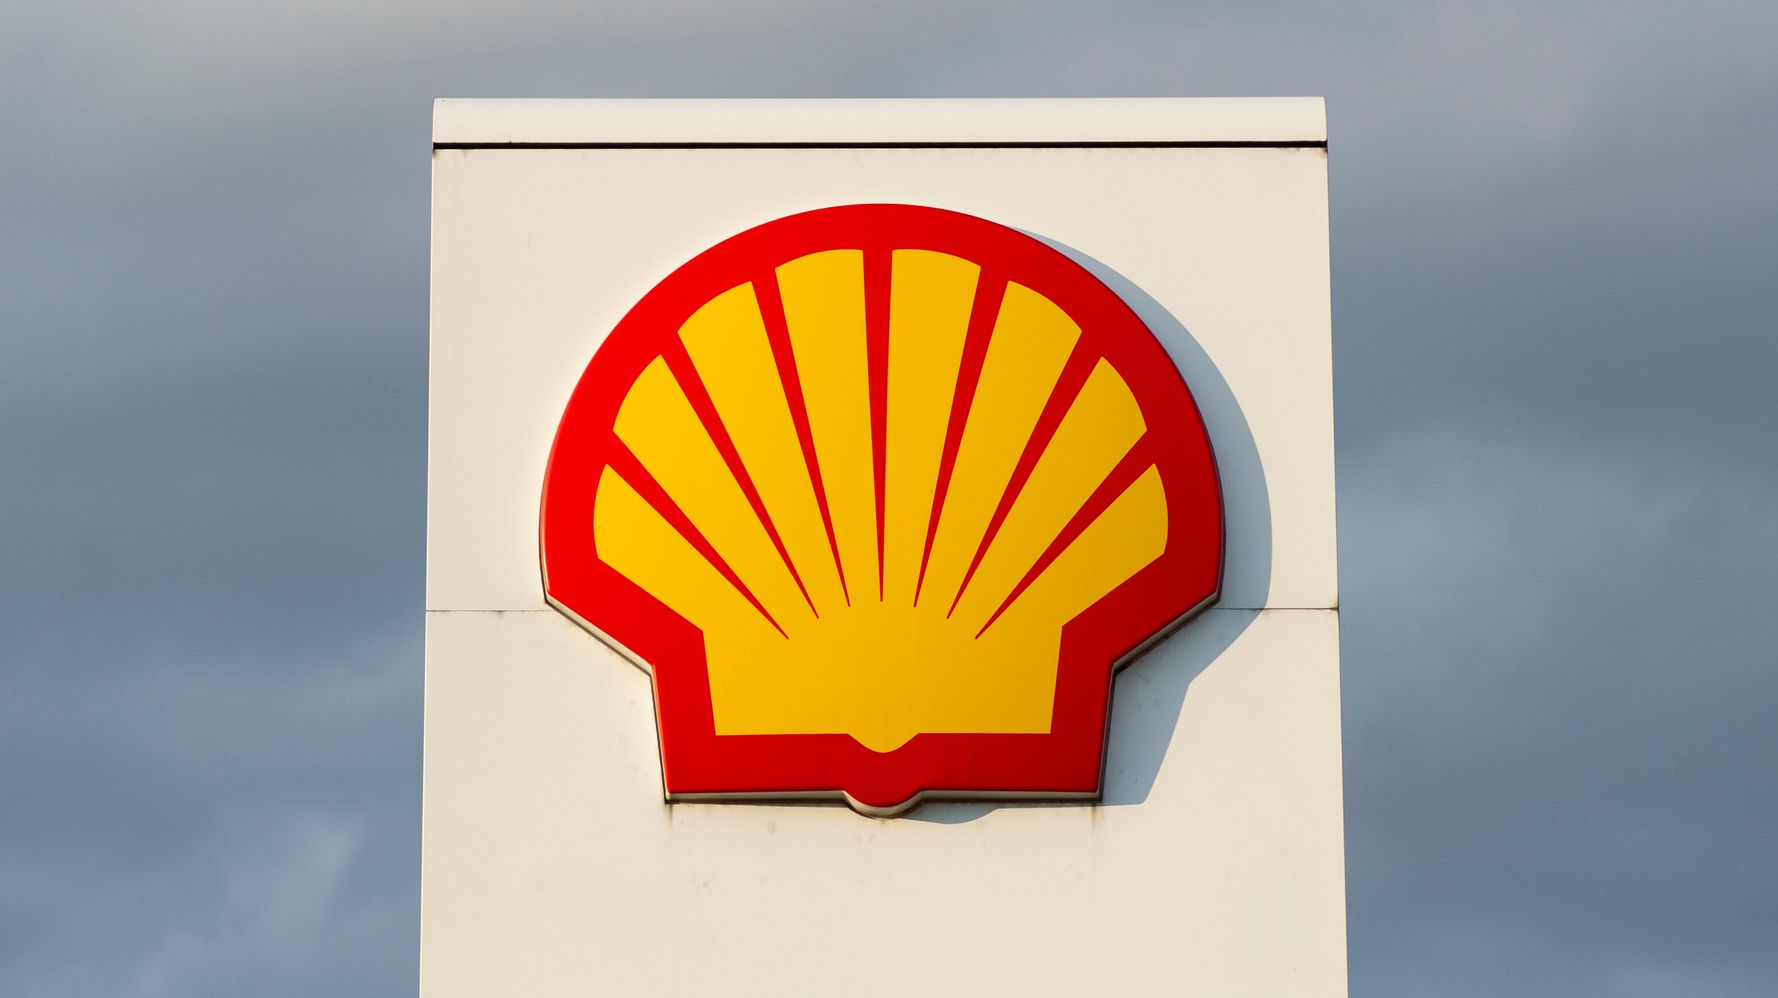 Court In Netherlands Orders Royal Dutch Shell To Cut Carbon Emissions